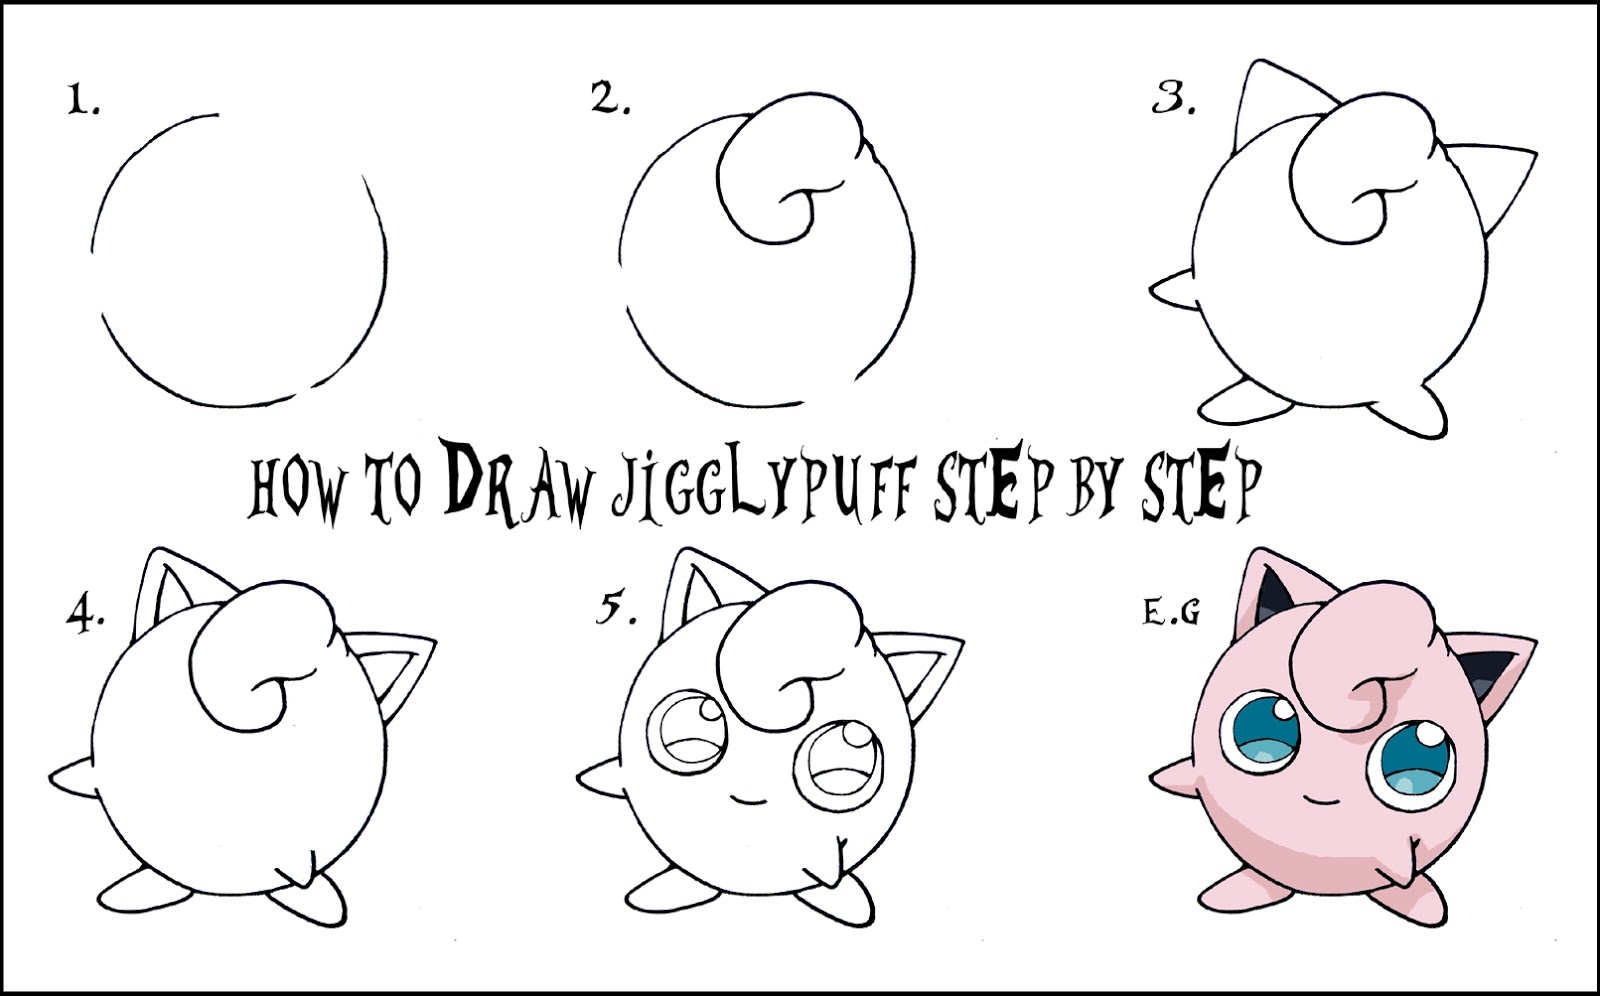 DARYL HOBSON ARTWORK: How To Draw A Pokemon Step By Step: JIGGLYPUFF